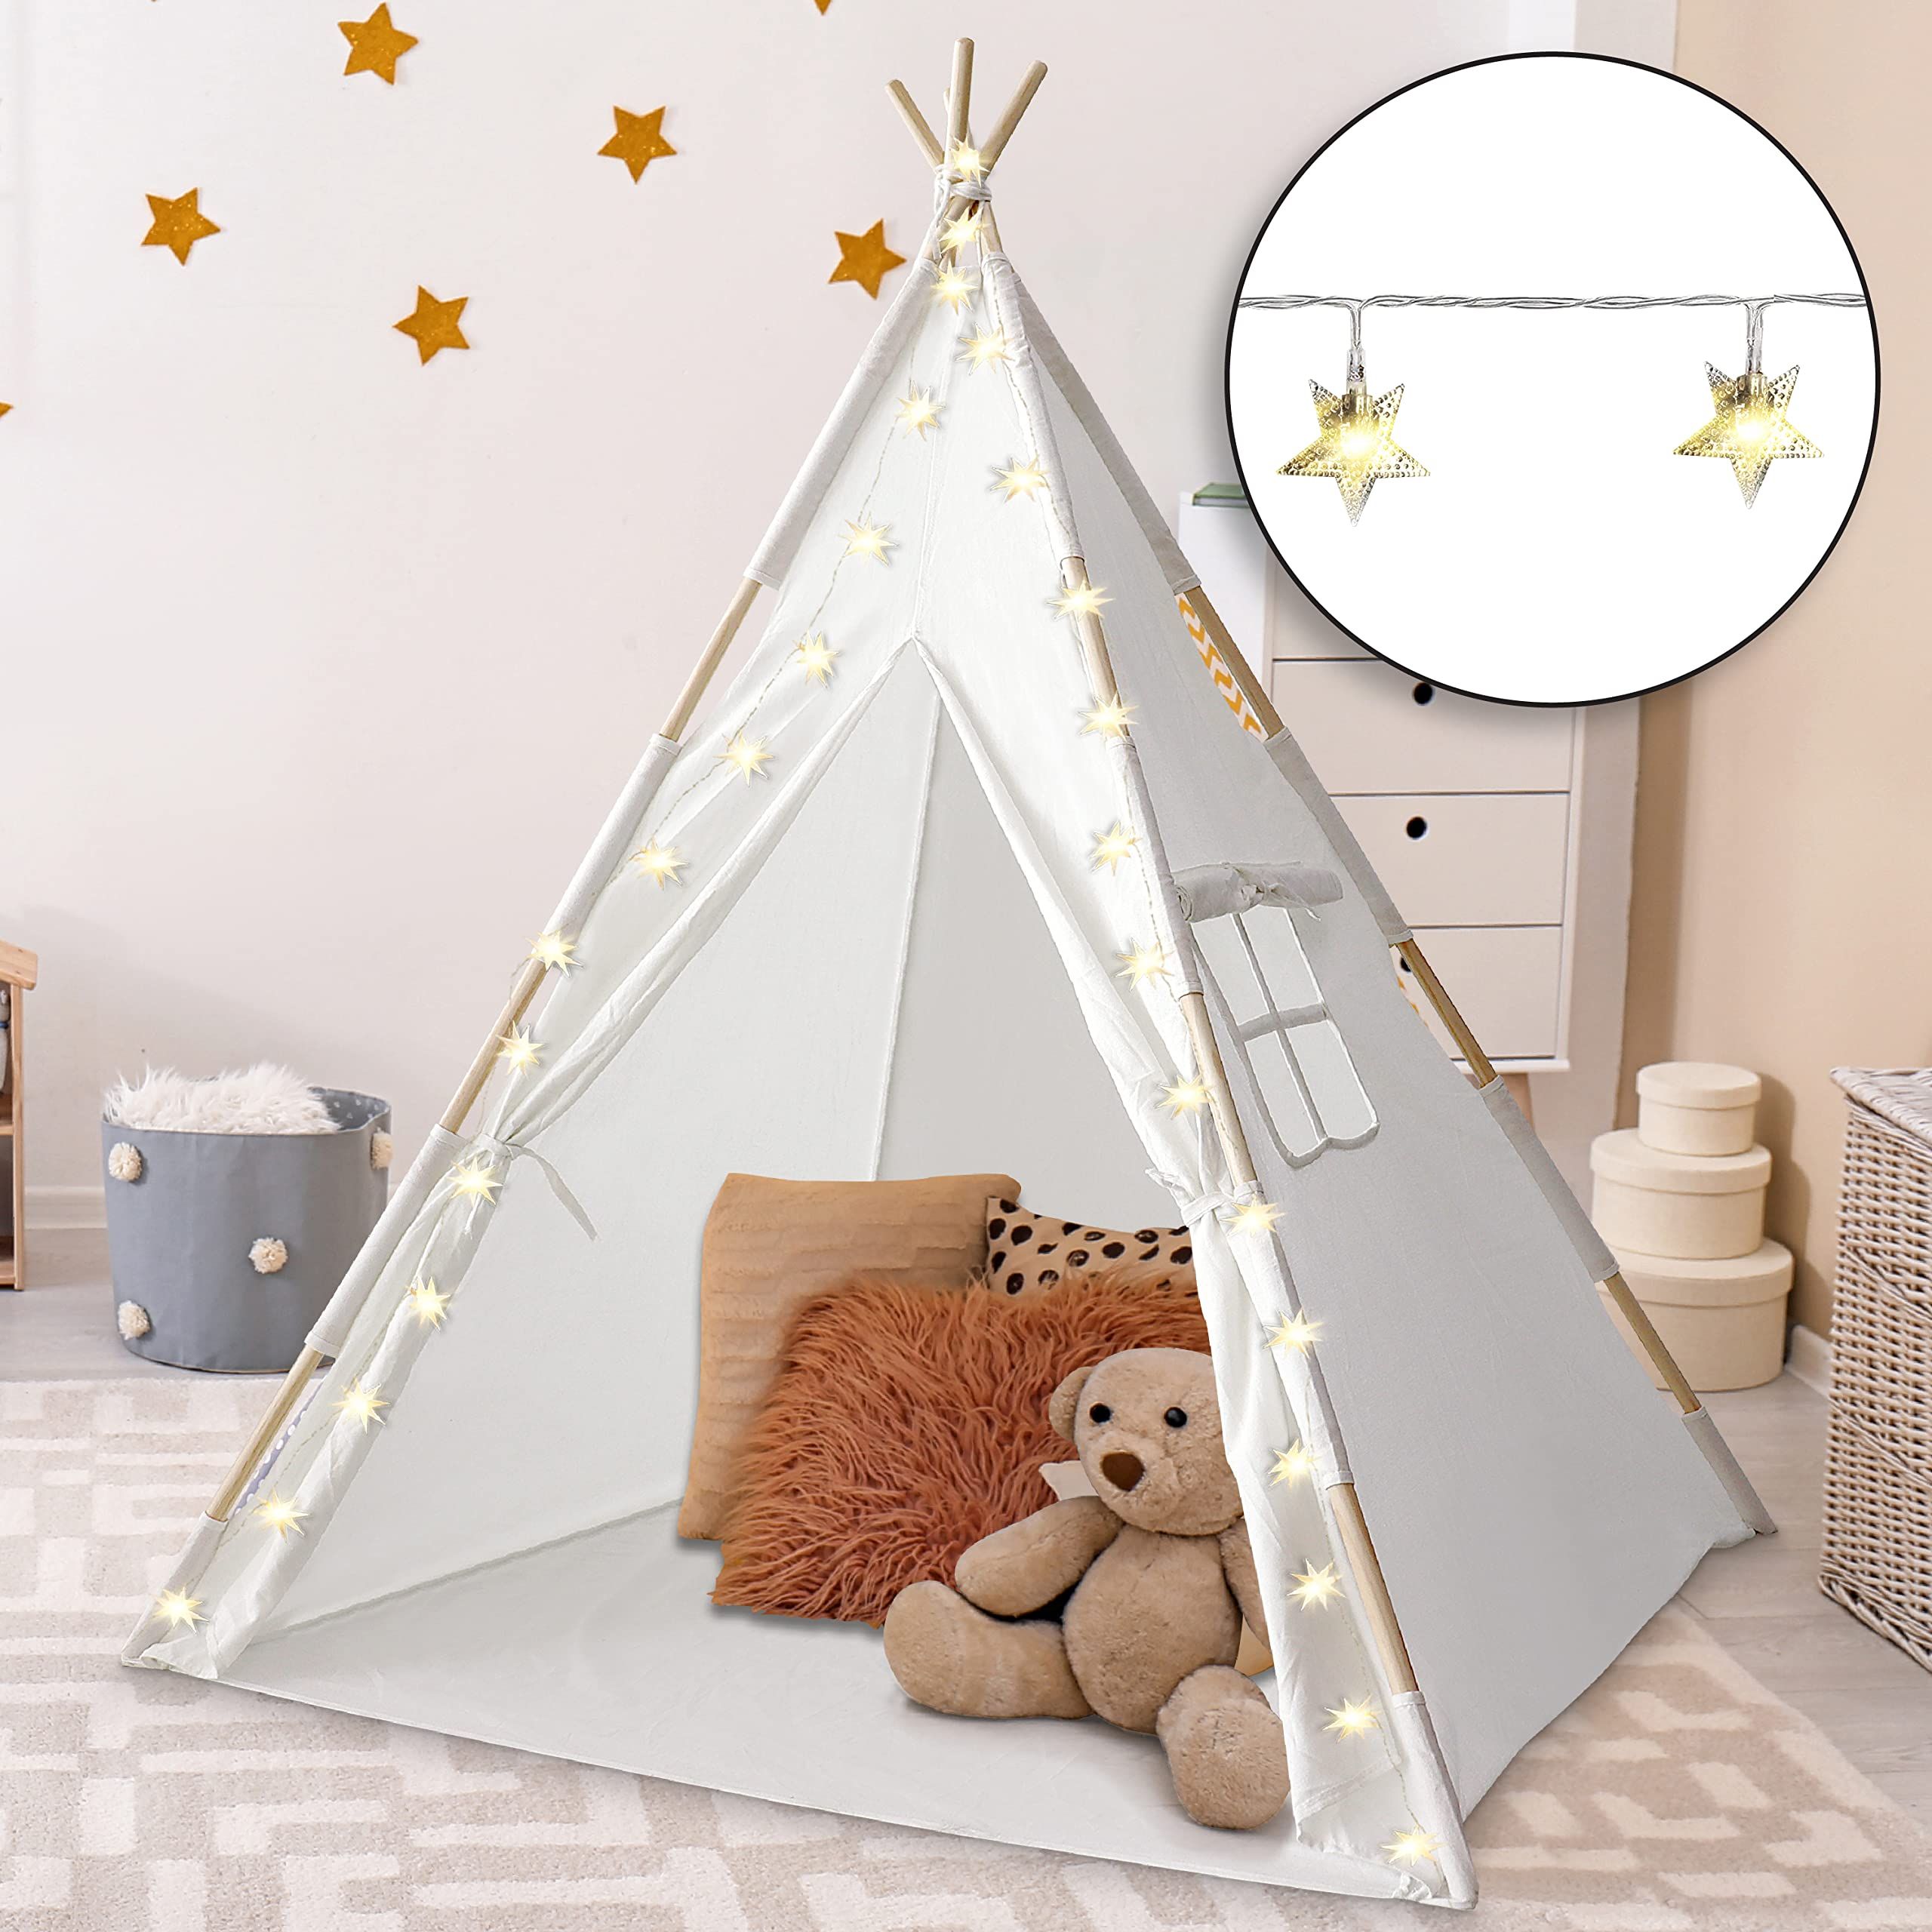 Orian Toys Teepee Tent for Kids: Child’s Indoor Outdoor Canvas Fairytale Tipi Playroom, LED Star Lig | Amazon (US)